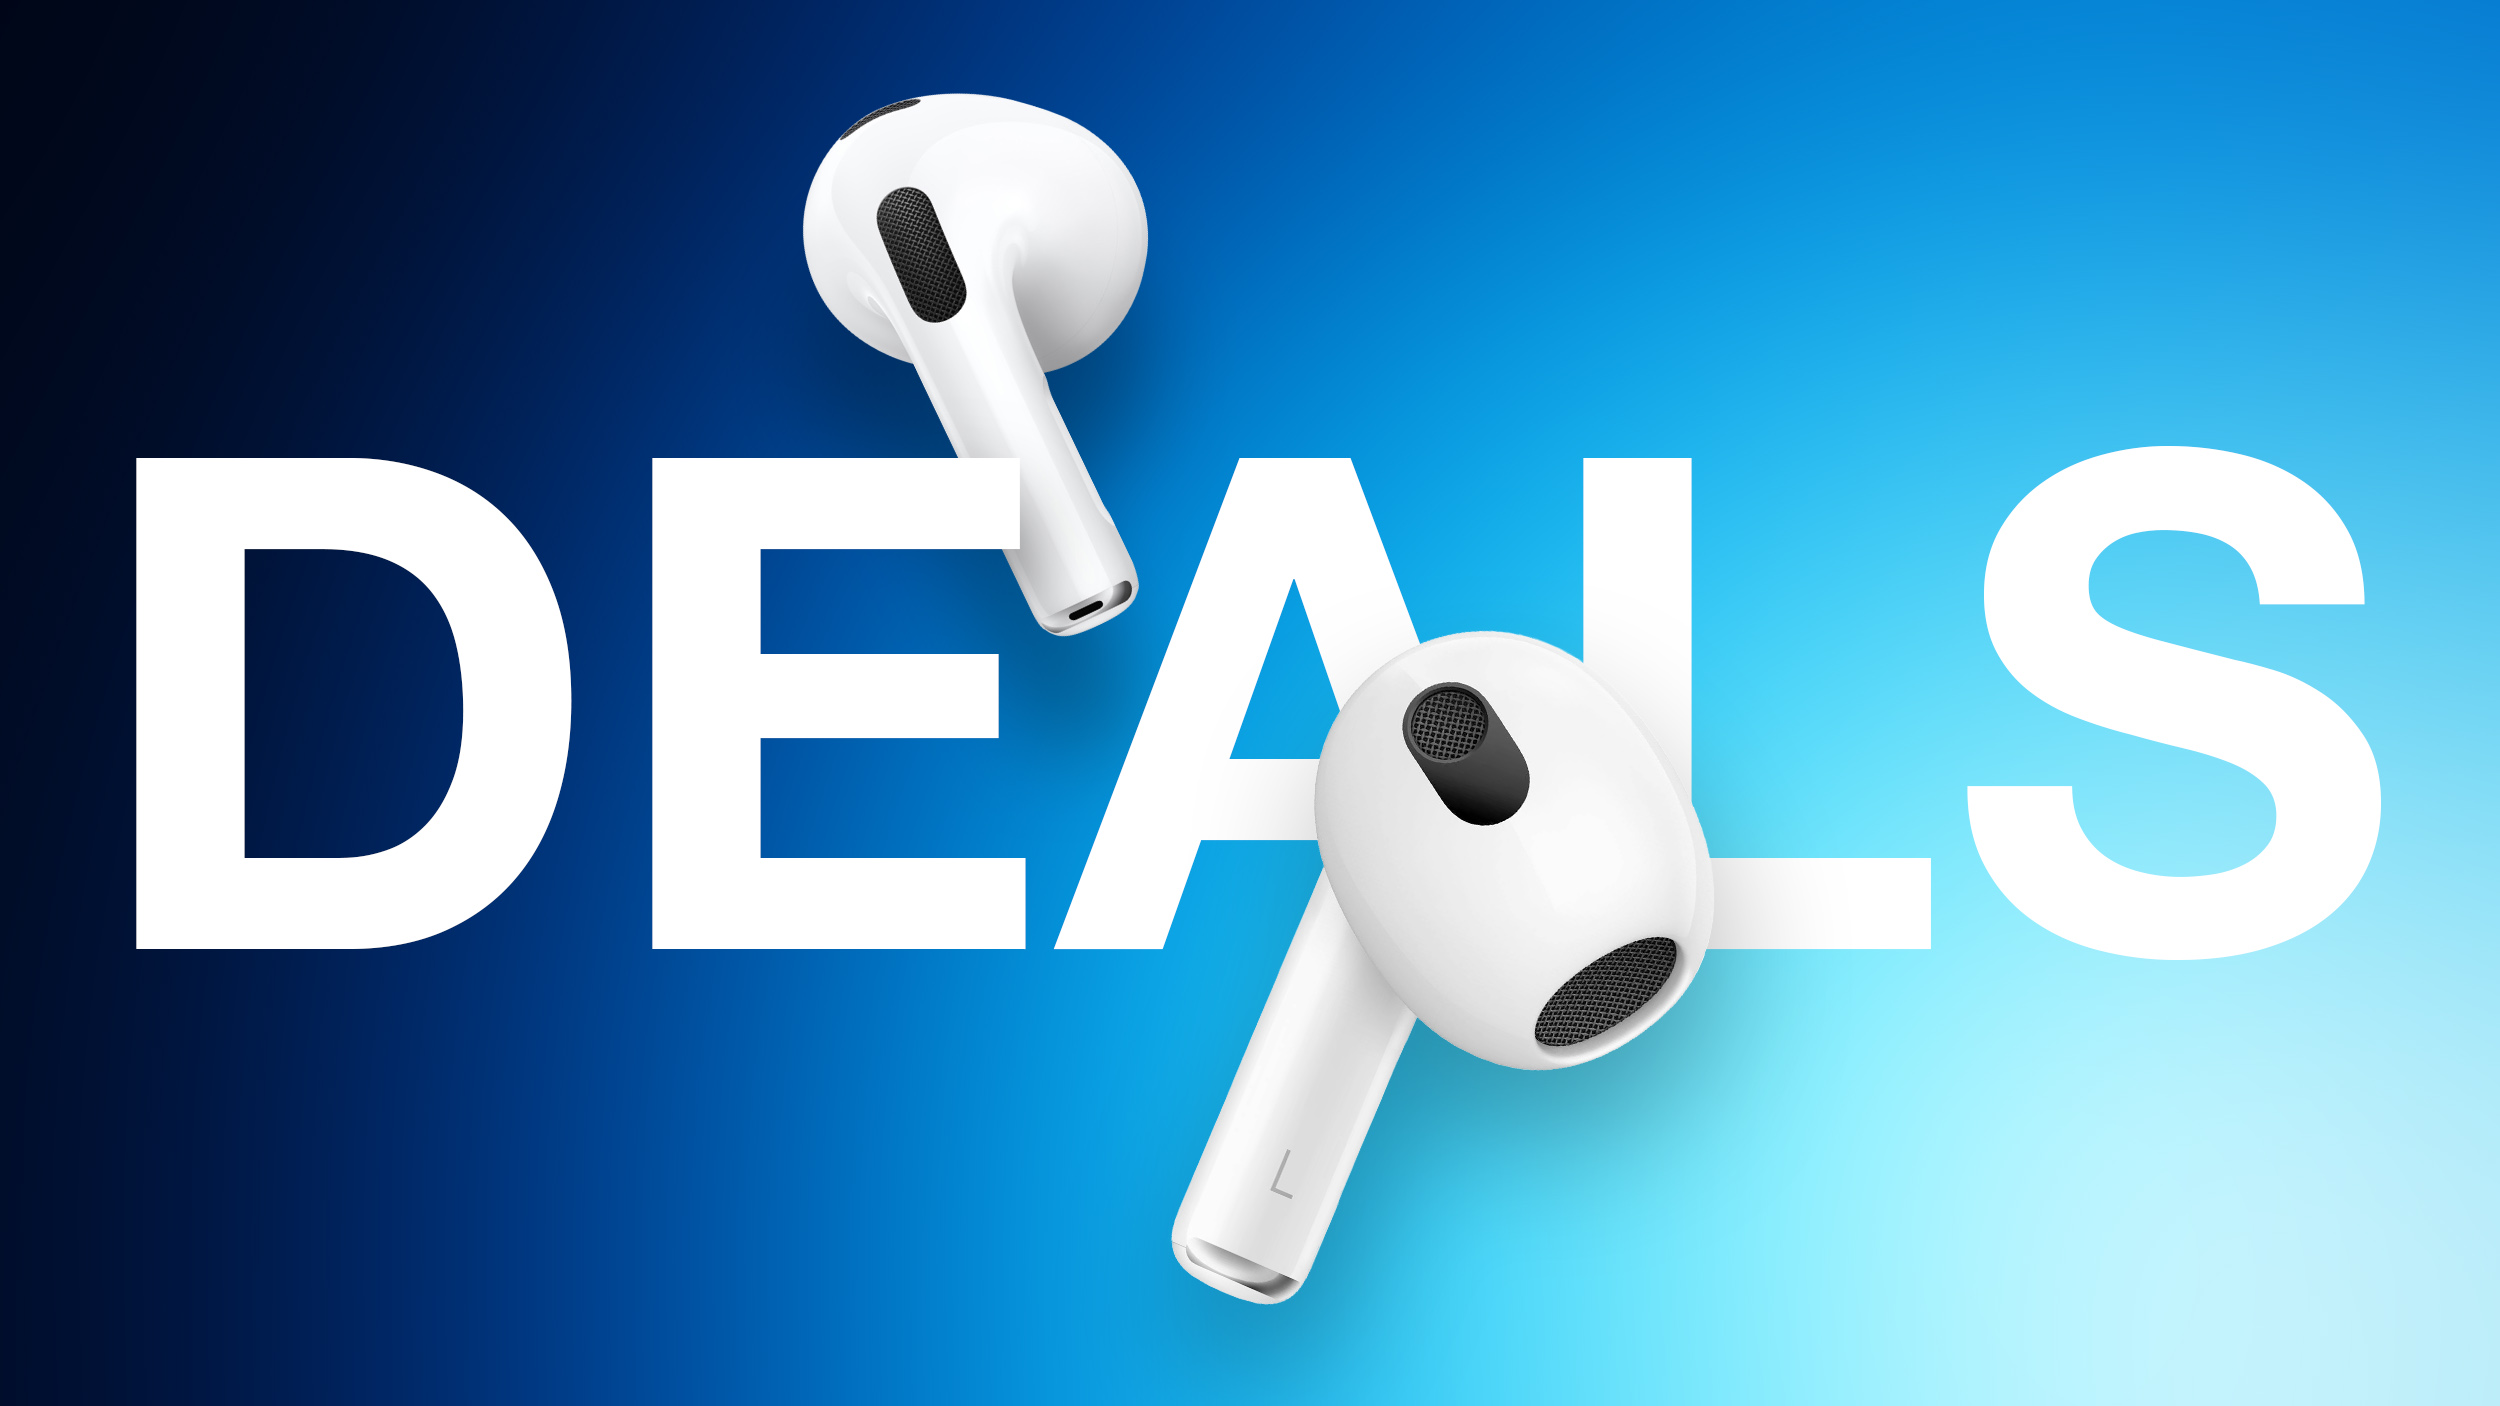 AirPods 3 Drop to Record Low Price of $139.99 on Amazon, Plus More AirPods Deals